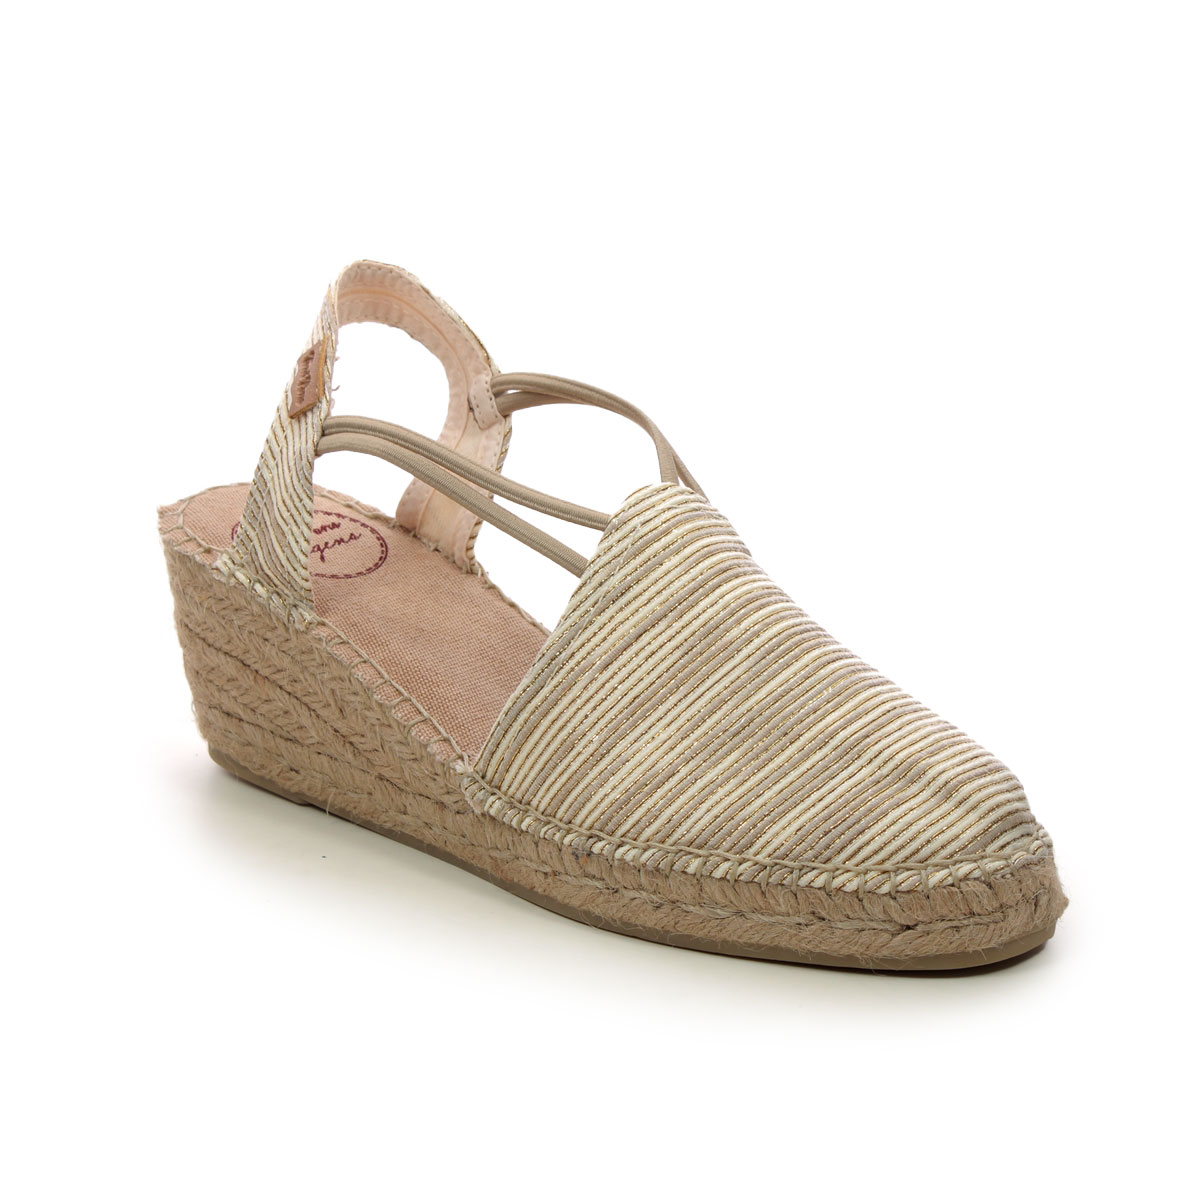 Toni Pons Tania Zr 4 Beige Womens Espadrilles 4005-55 in a Plain Textile in Size 41